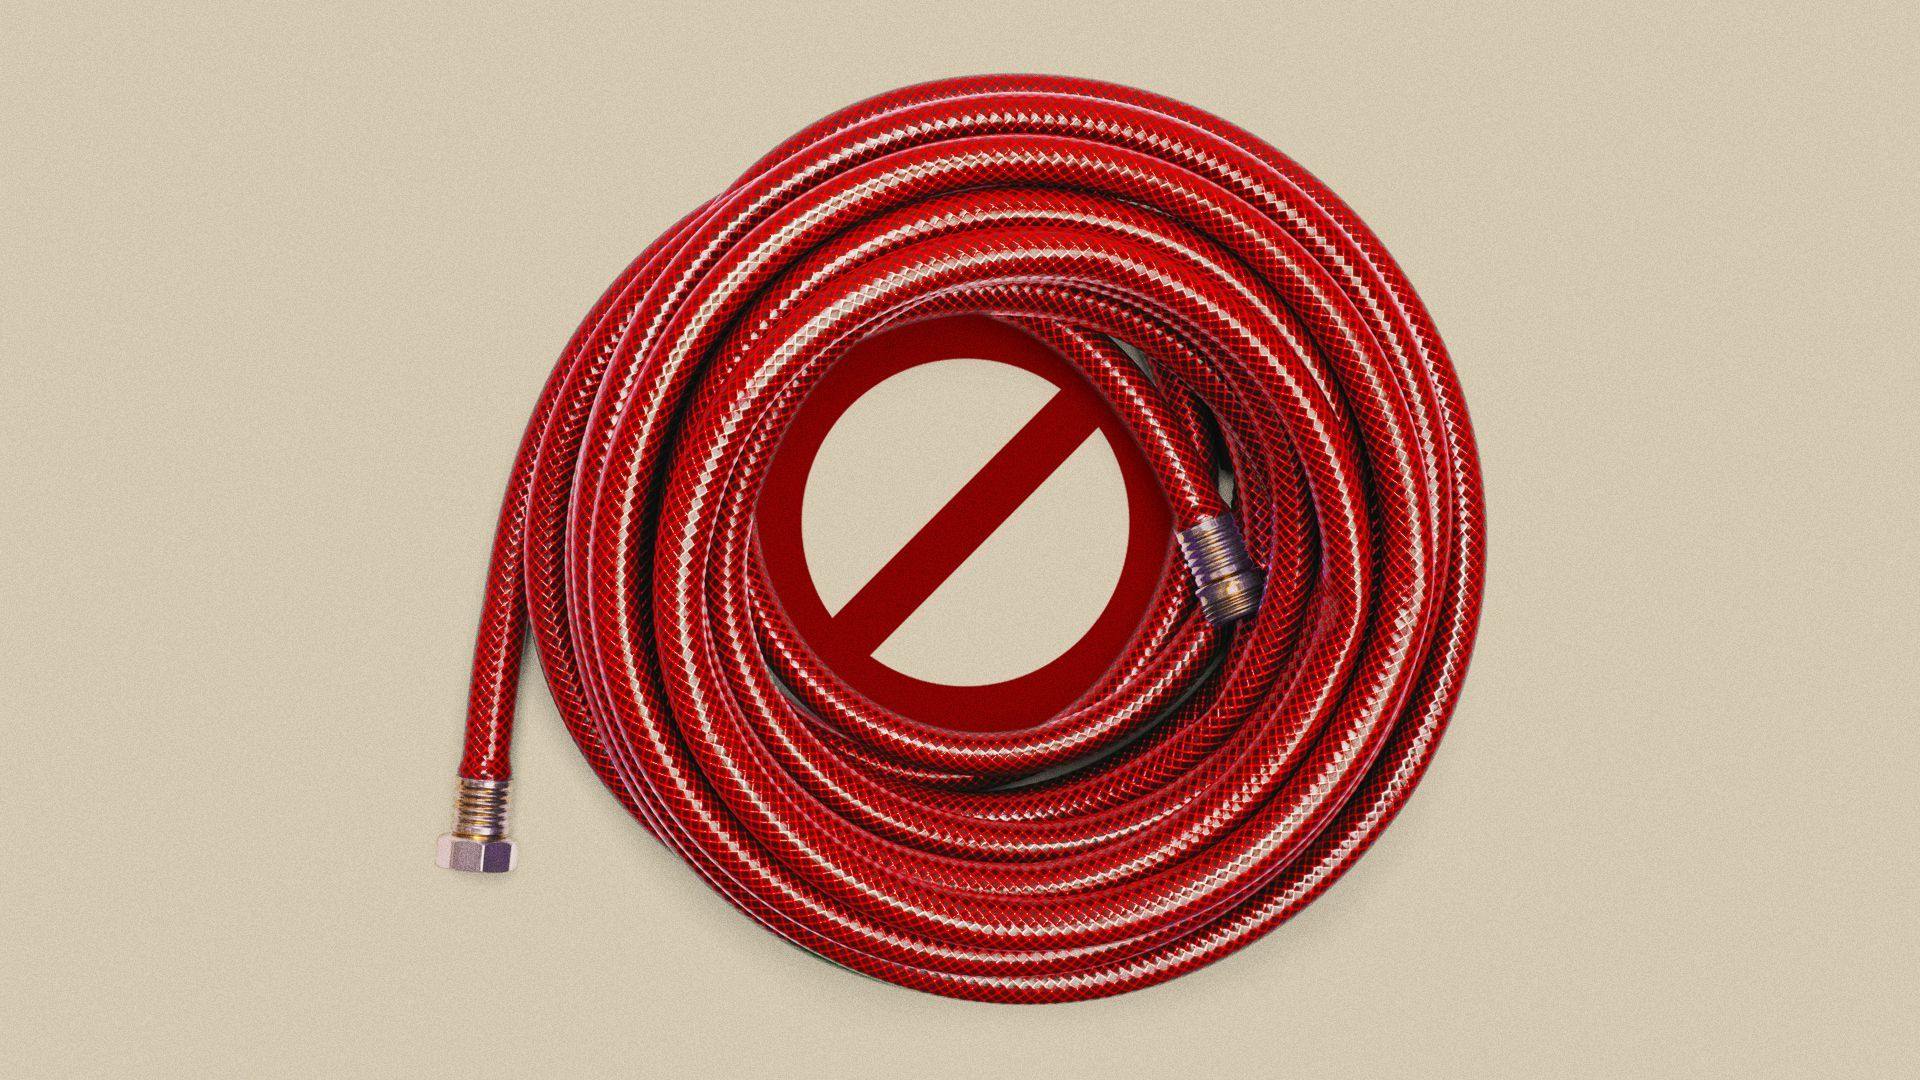 Illustration of a red garden hose coiled in a circle, forming a "no" symbol.